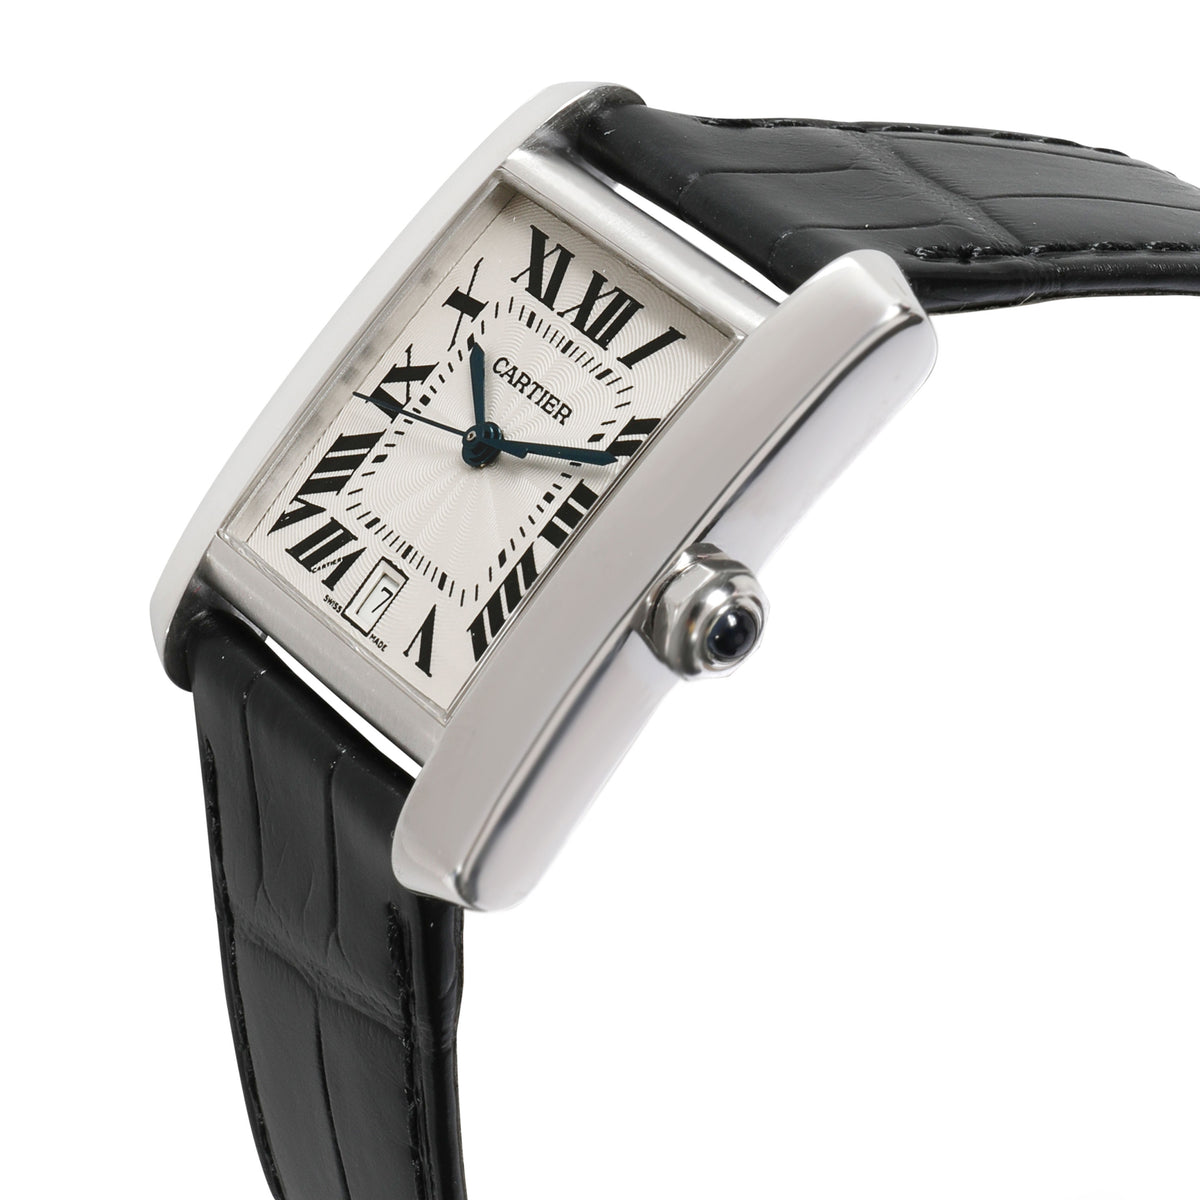 Cartier Tank Francaise W5001156 Unisex Watch in 18kt White Gold